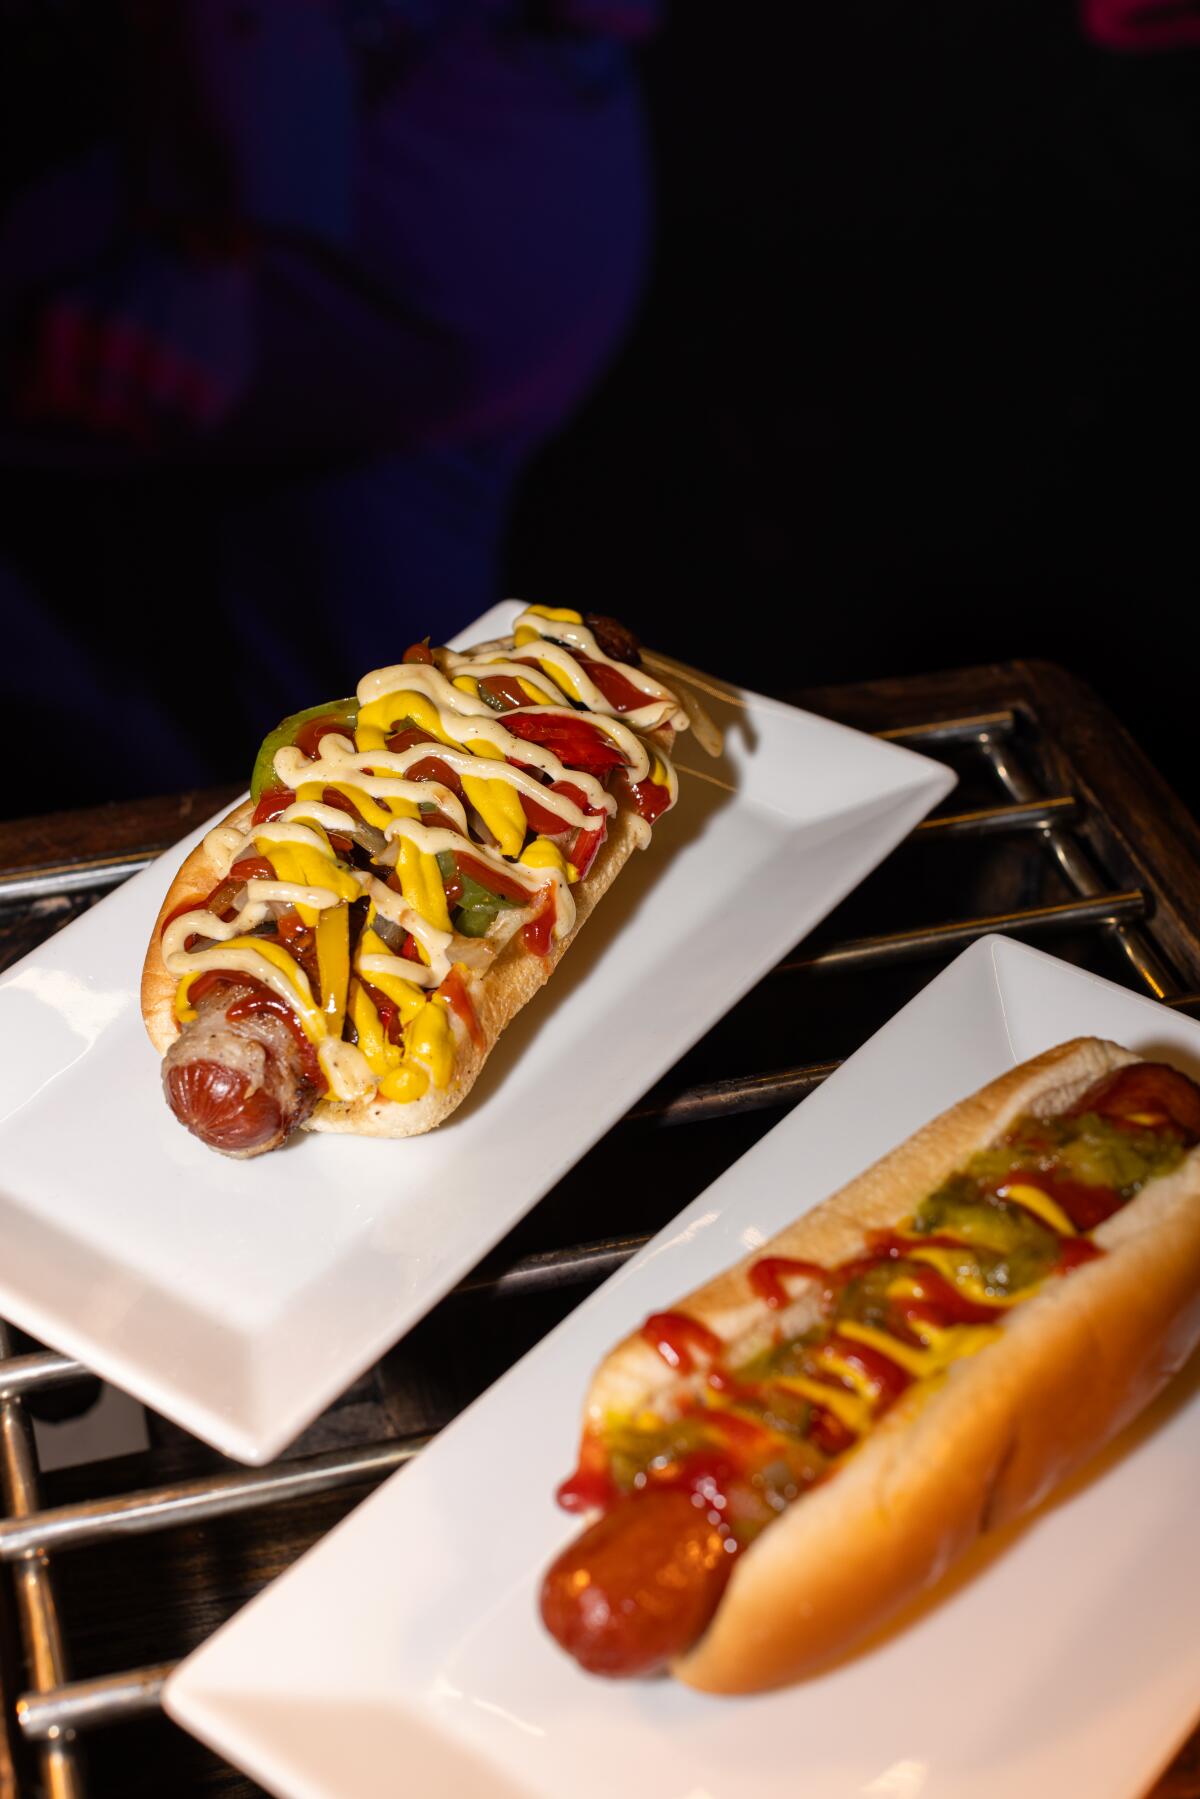 The new Intuit Dome will serve hot dogs and street dogs, both using Niman Ranch franks.